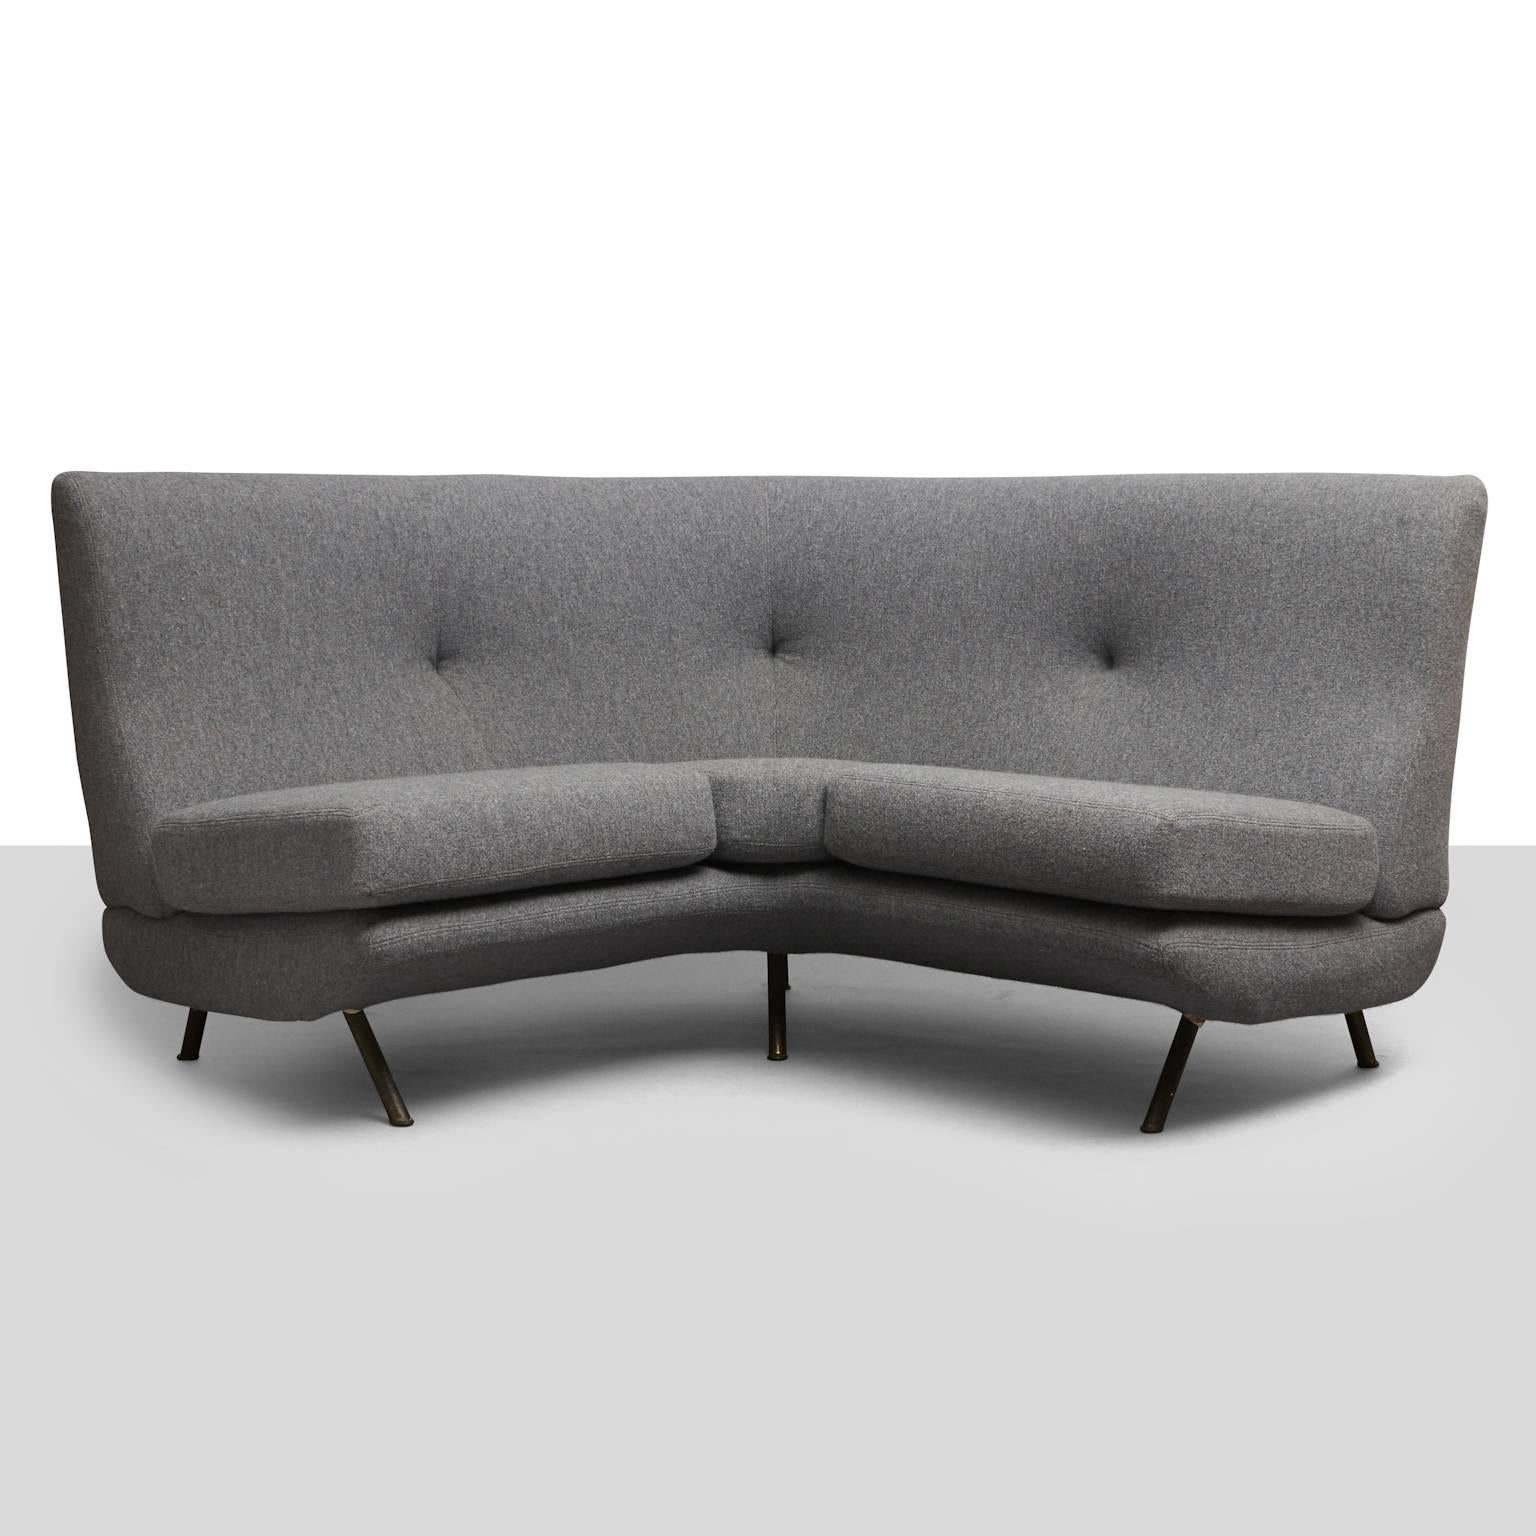 Triennale corner sofa designed by Marco Zanuso in 1951, produced by Arflex. Recently reupholstered in Holland and Sherry boiled wool.